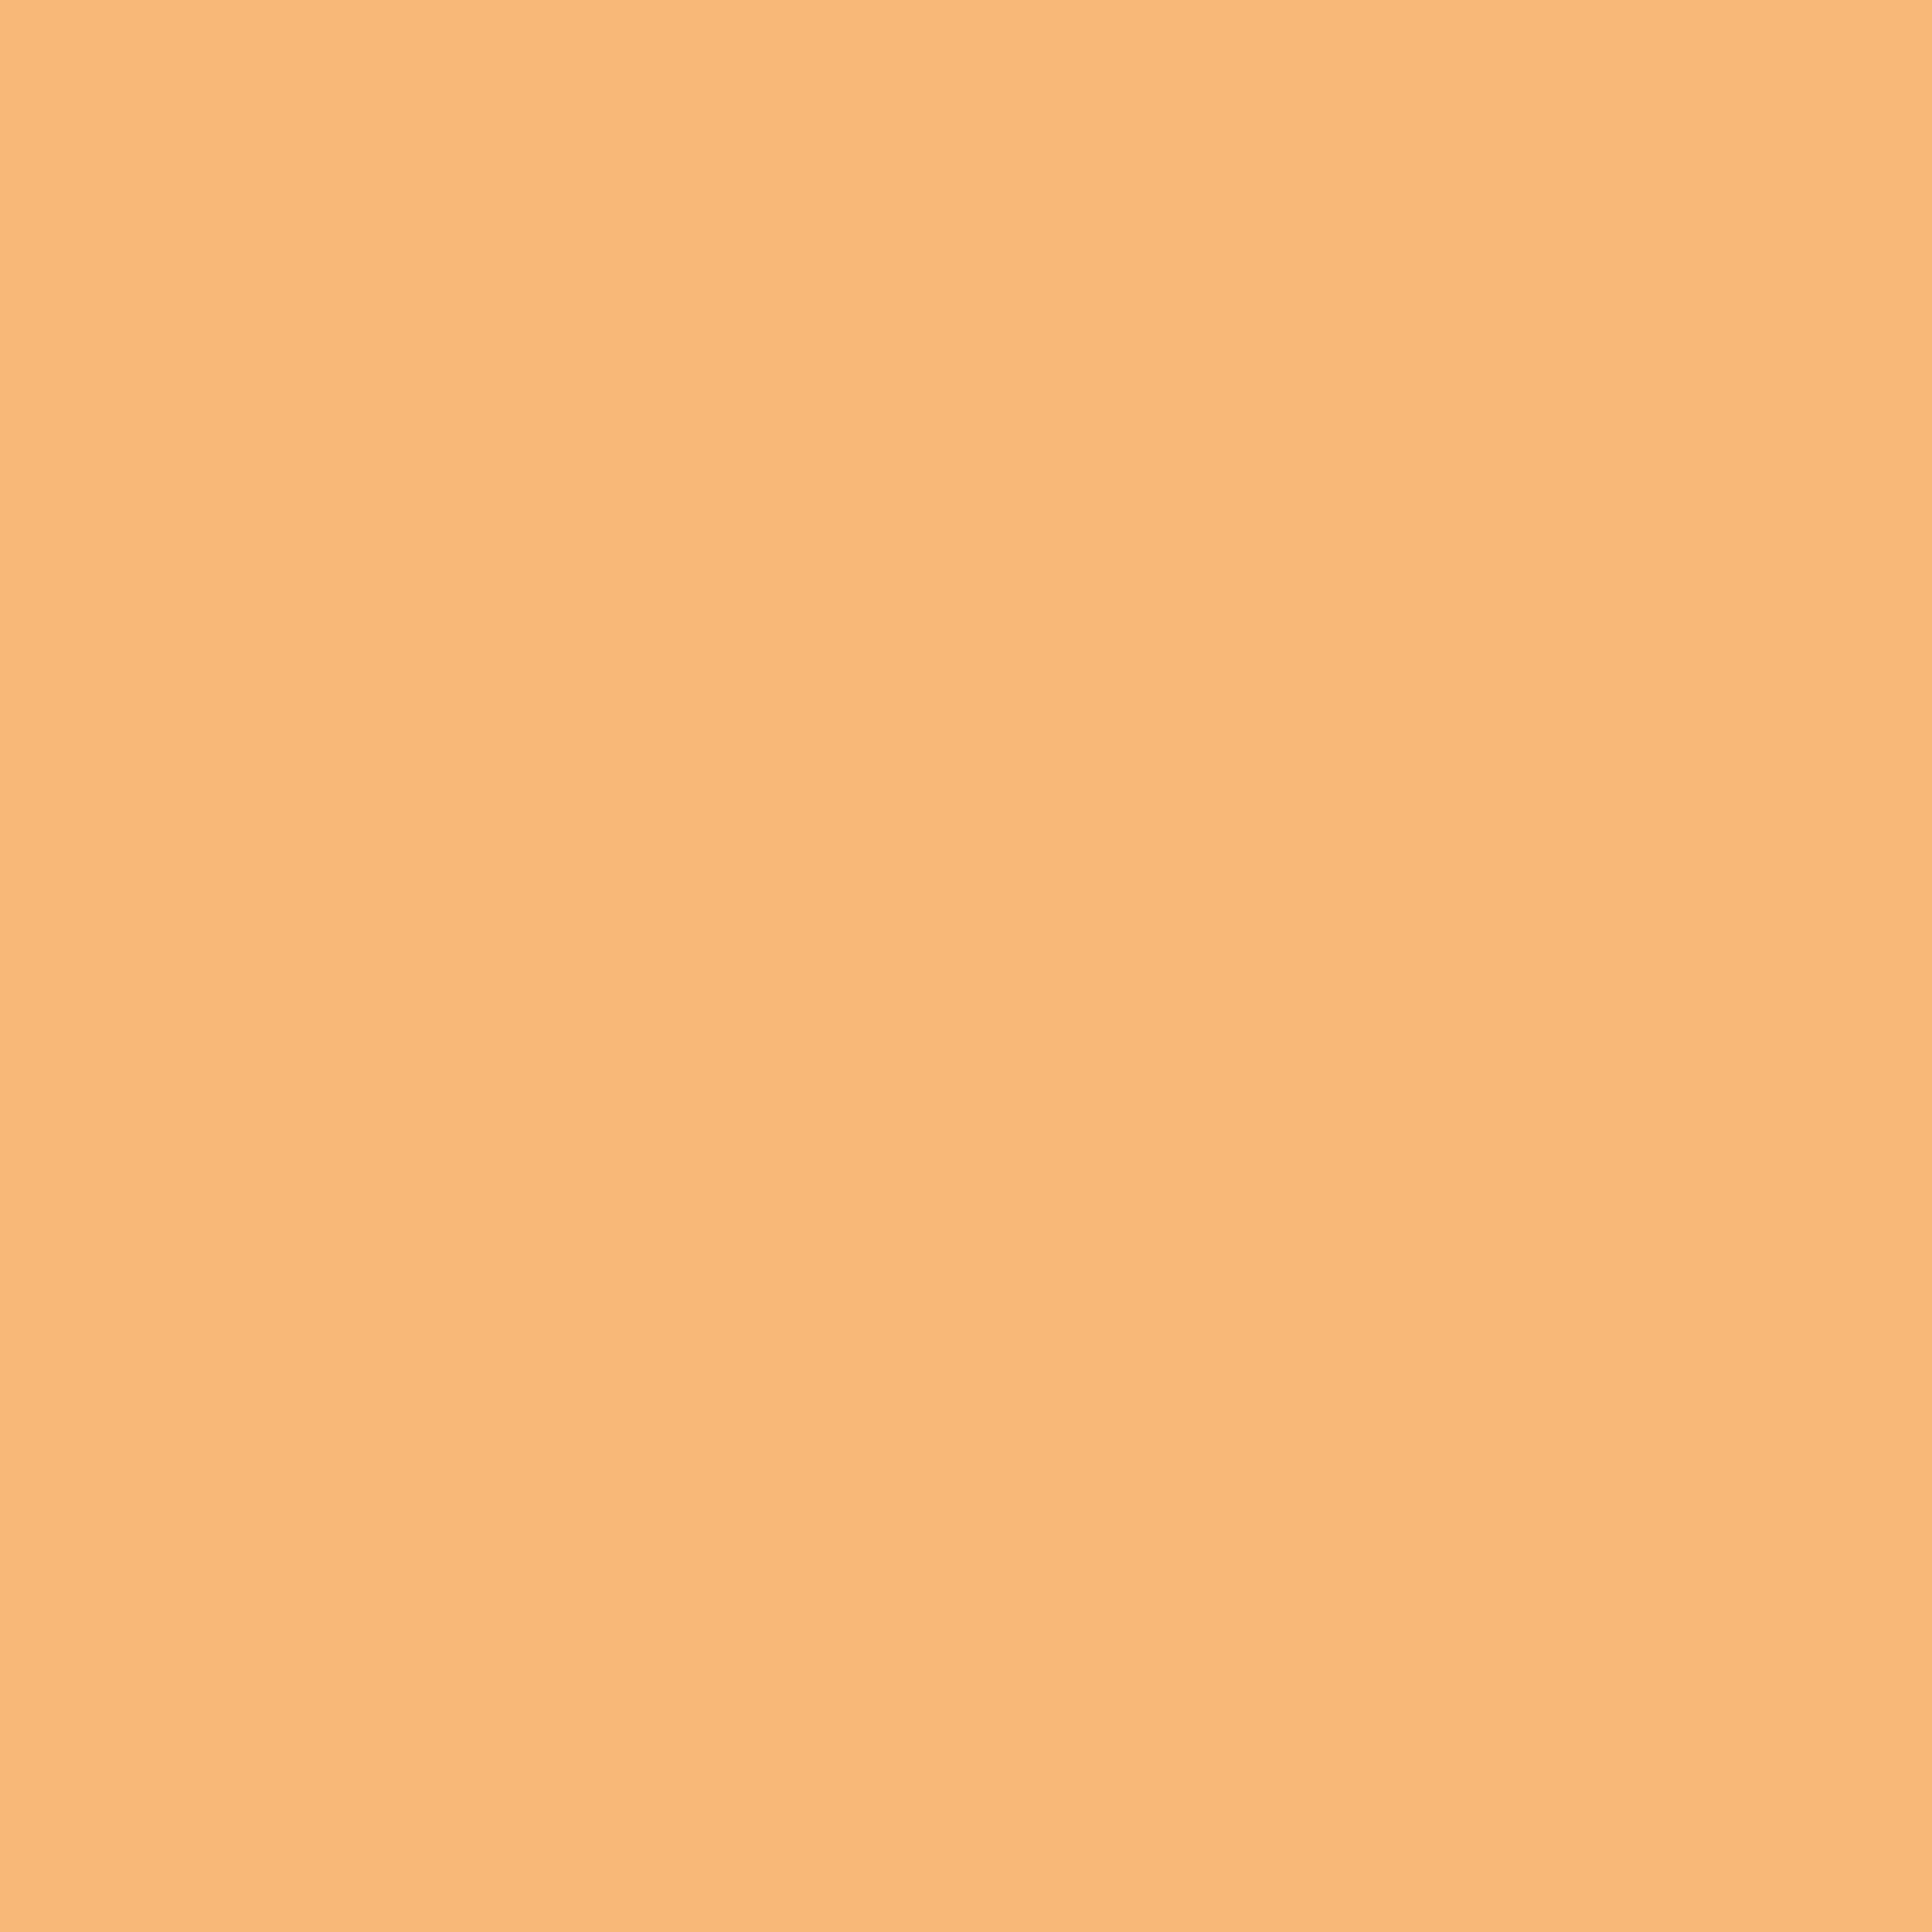 2732x2732 Mellow Apricot Solid Color Background